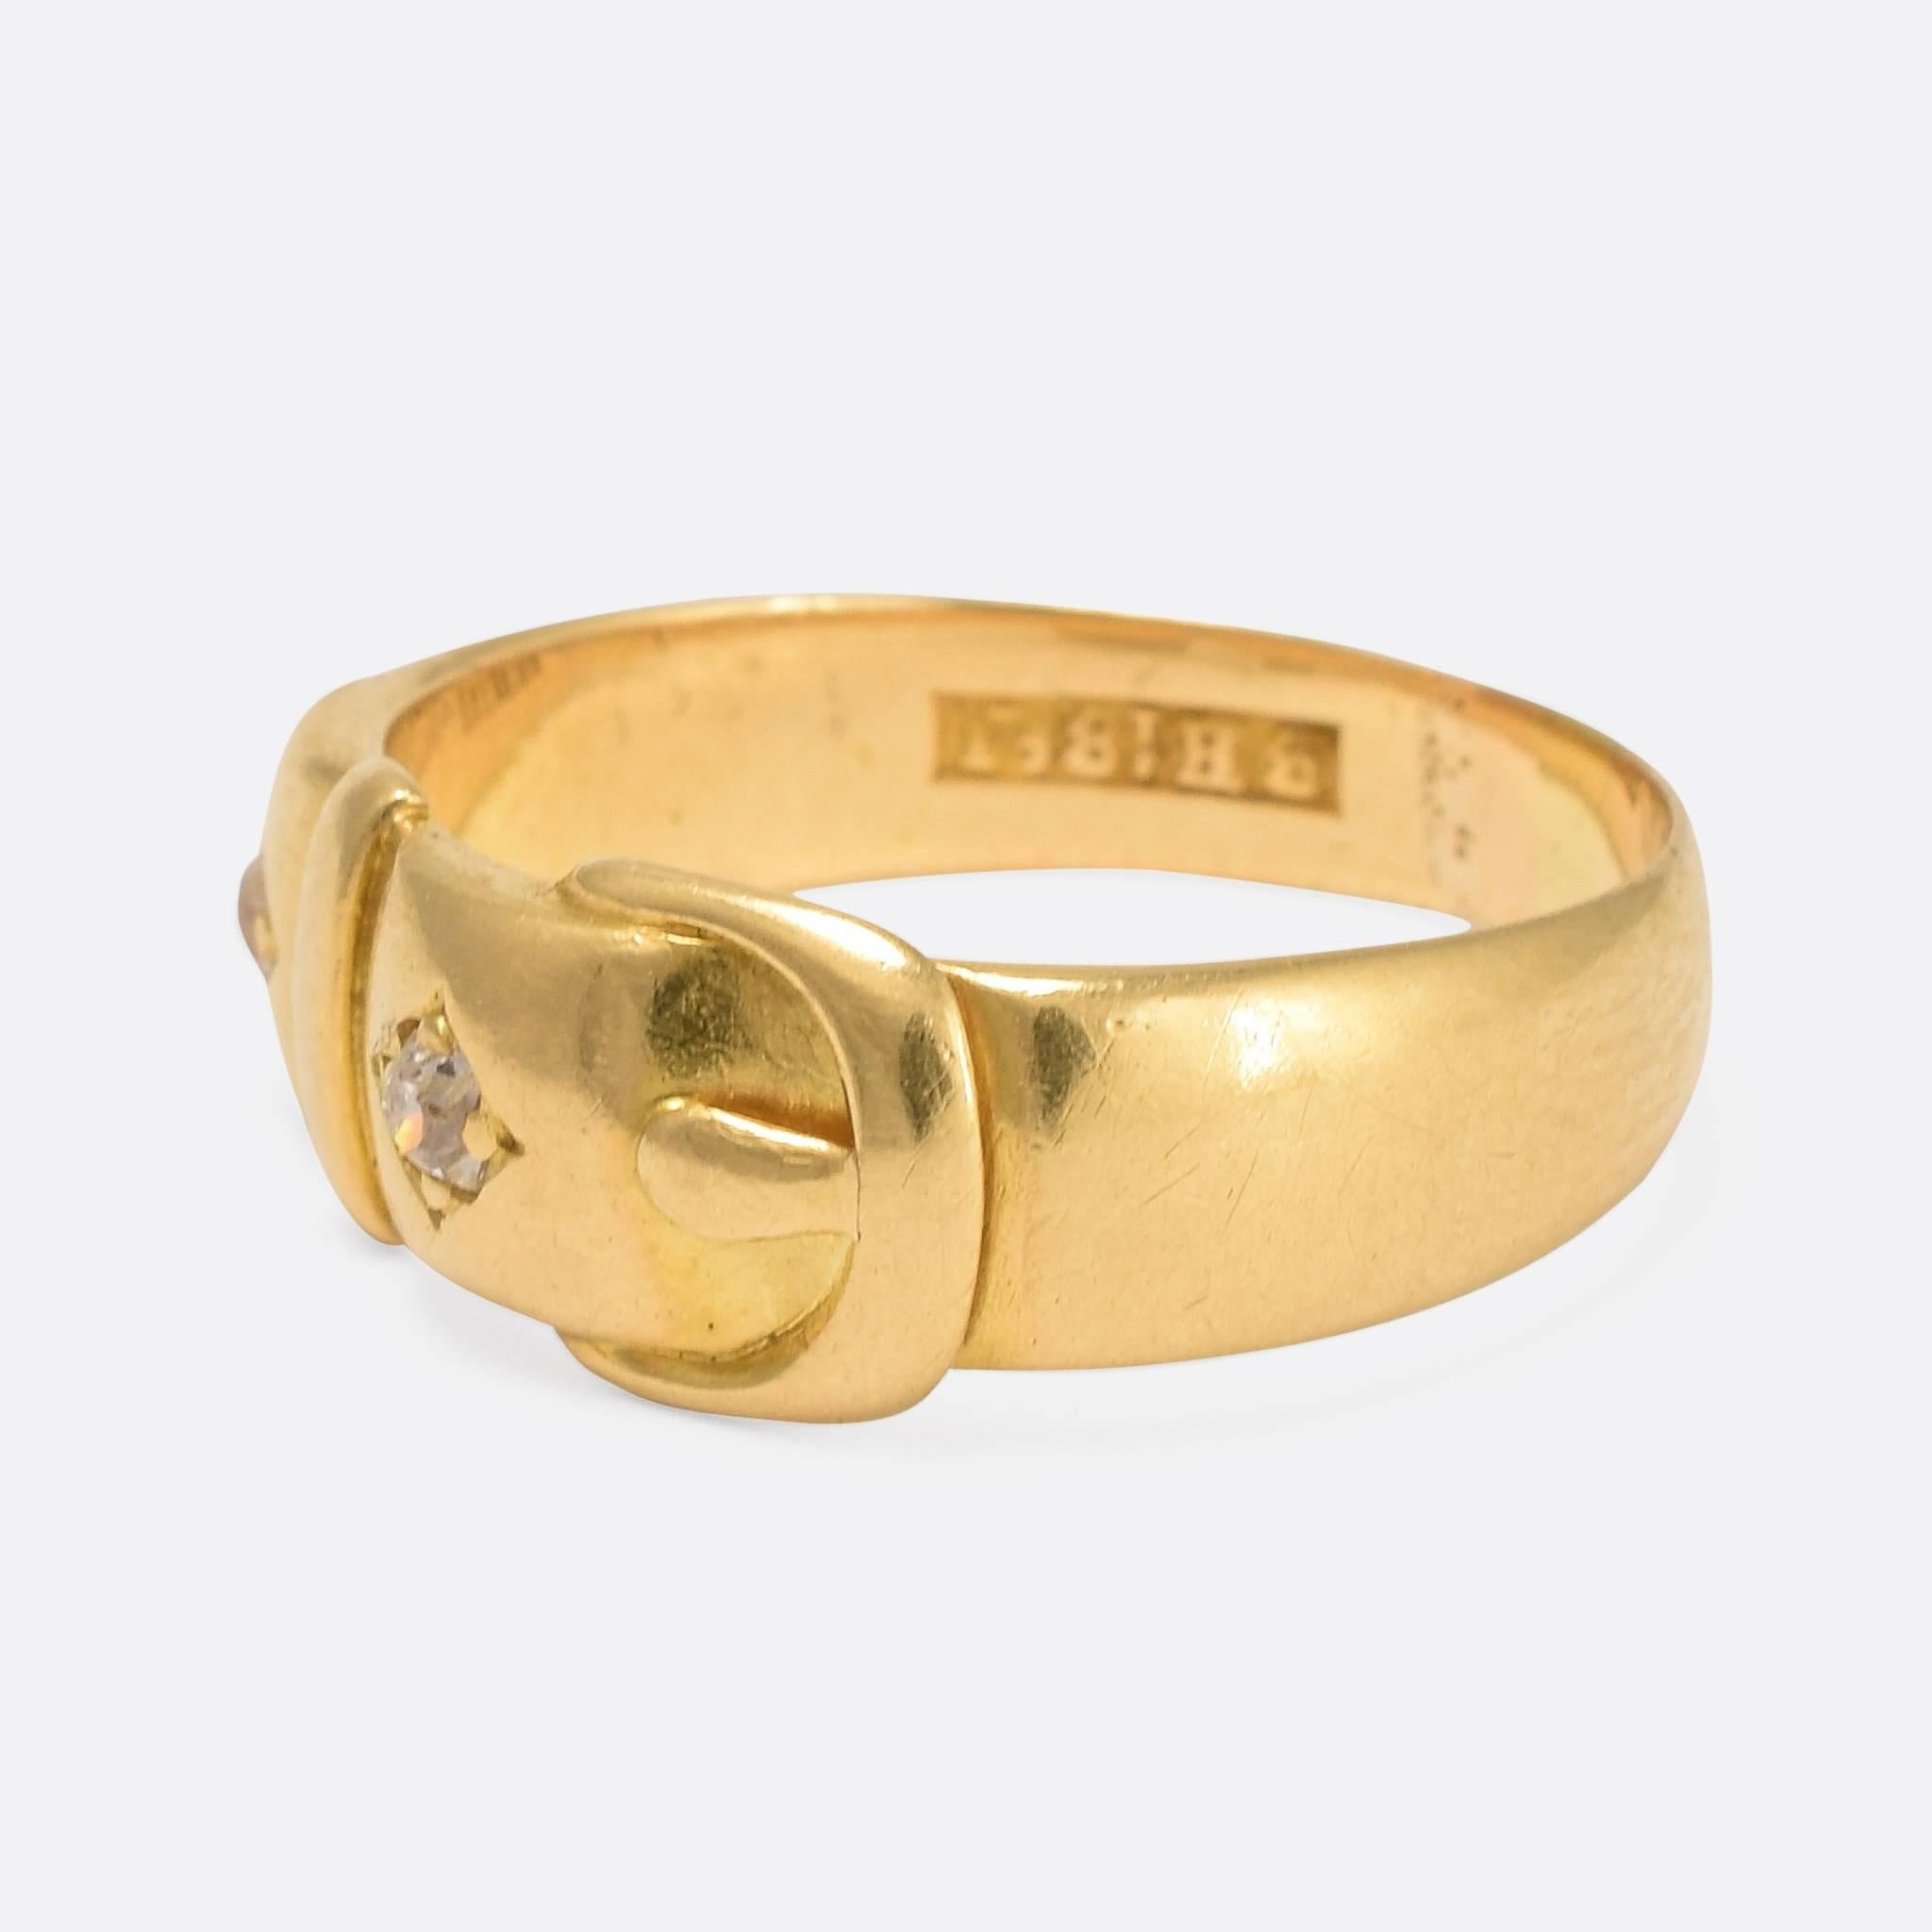 This lovely antique buckle ring is modelled in 18ct yellow gold, and set with two old mine cut diamonds. A timeless ring that displays beautiful craftsmanship. Ring Size: US: 6.5, or UK: M 1/2. Width of band: 3.7mm.